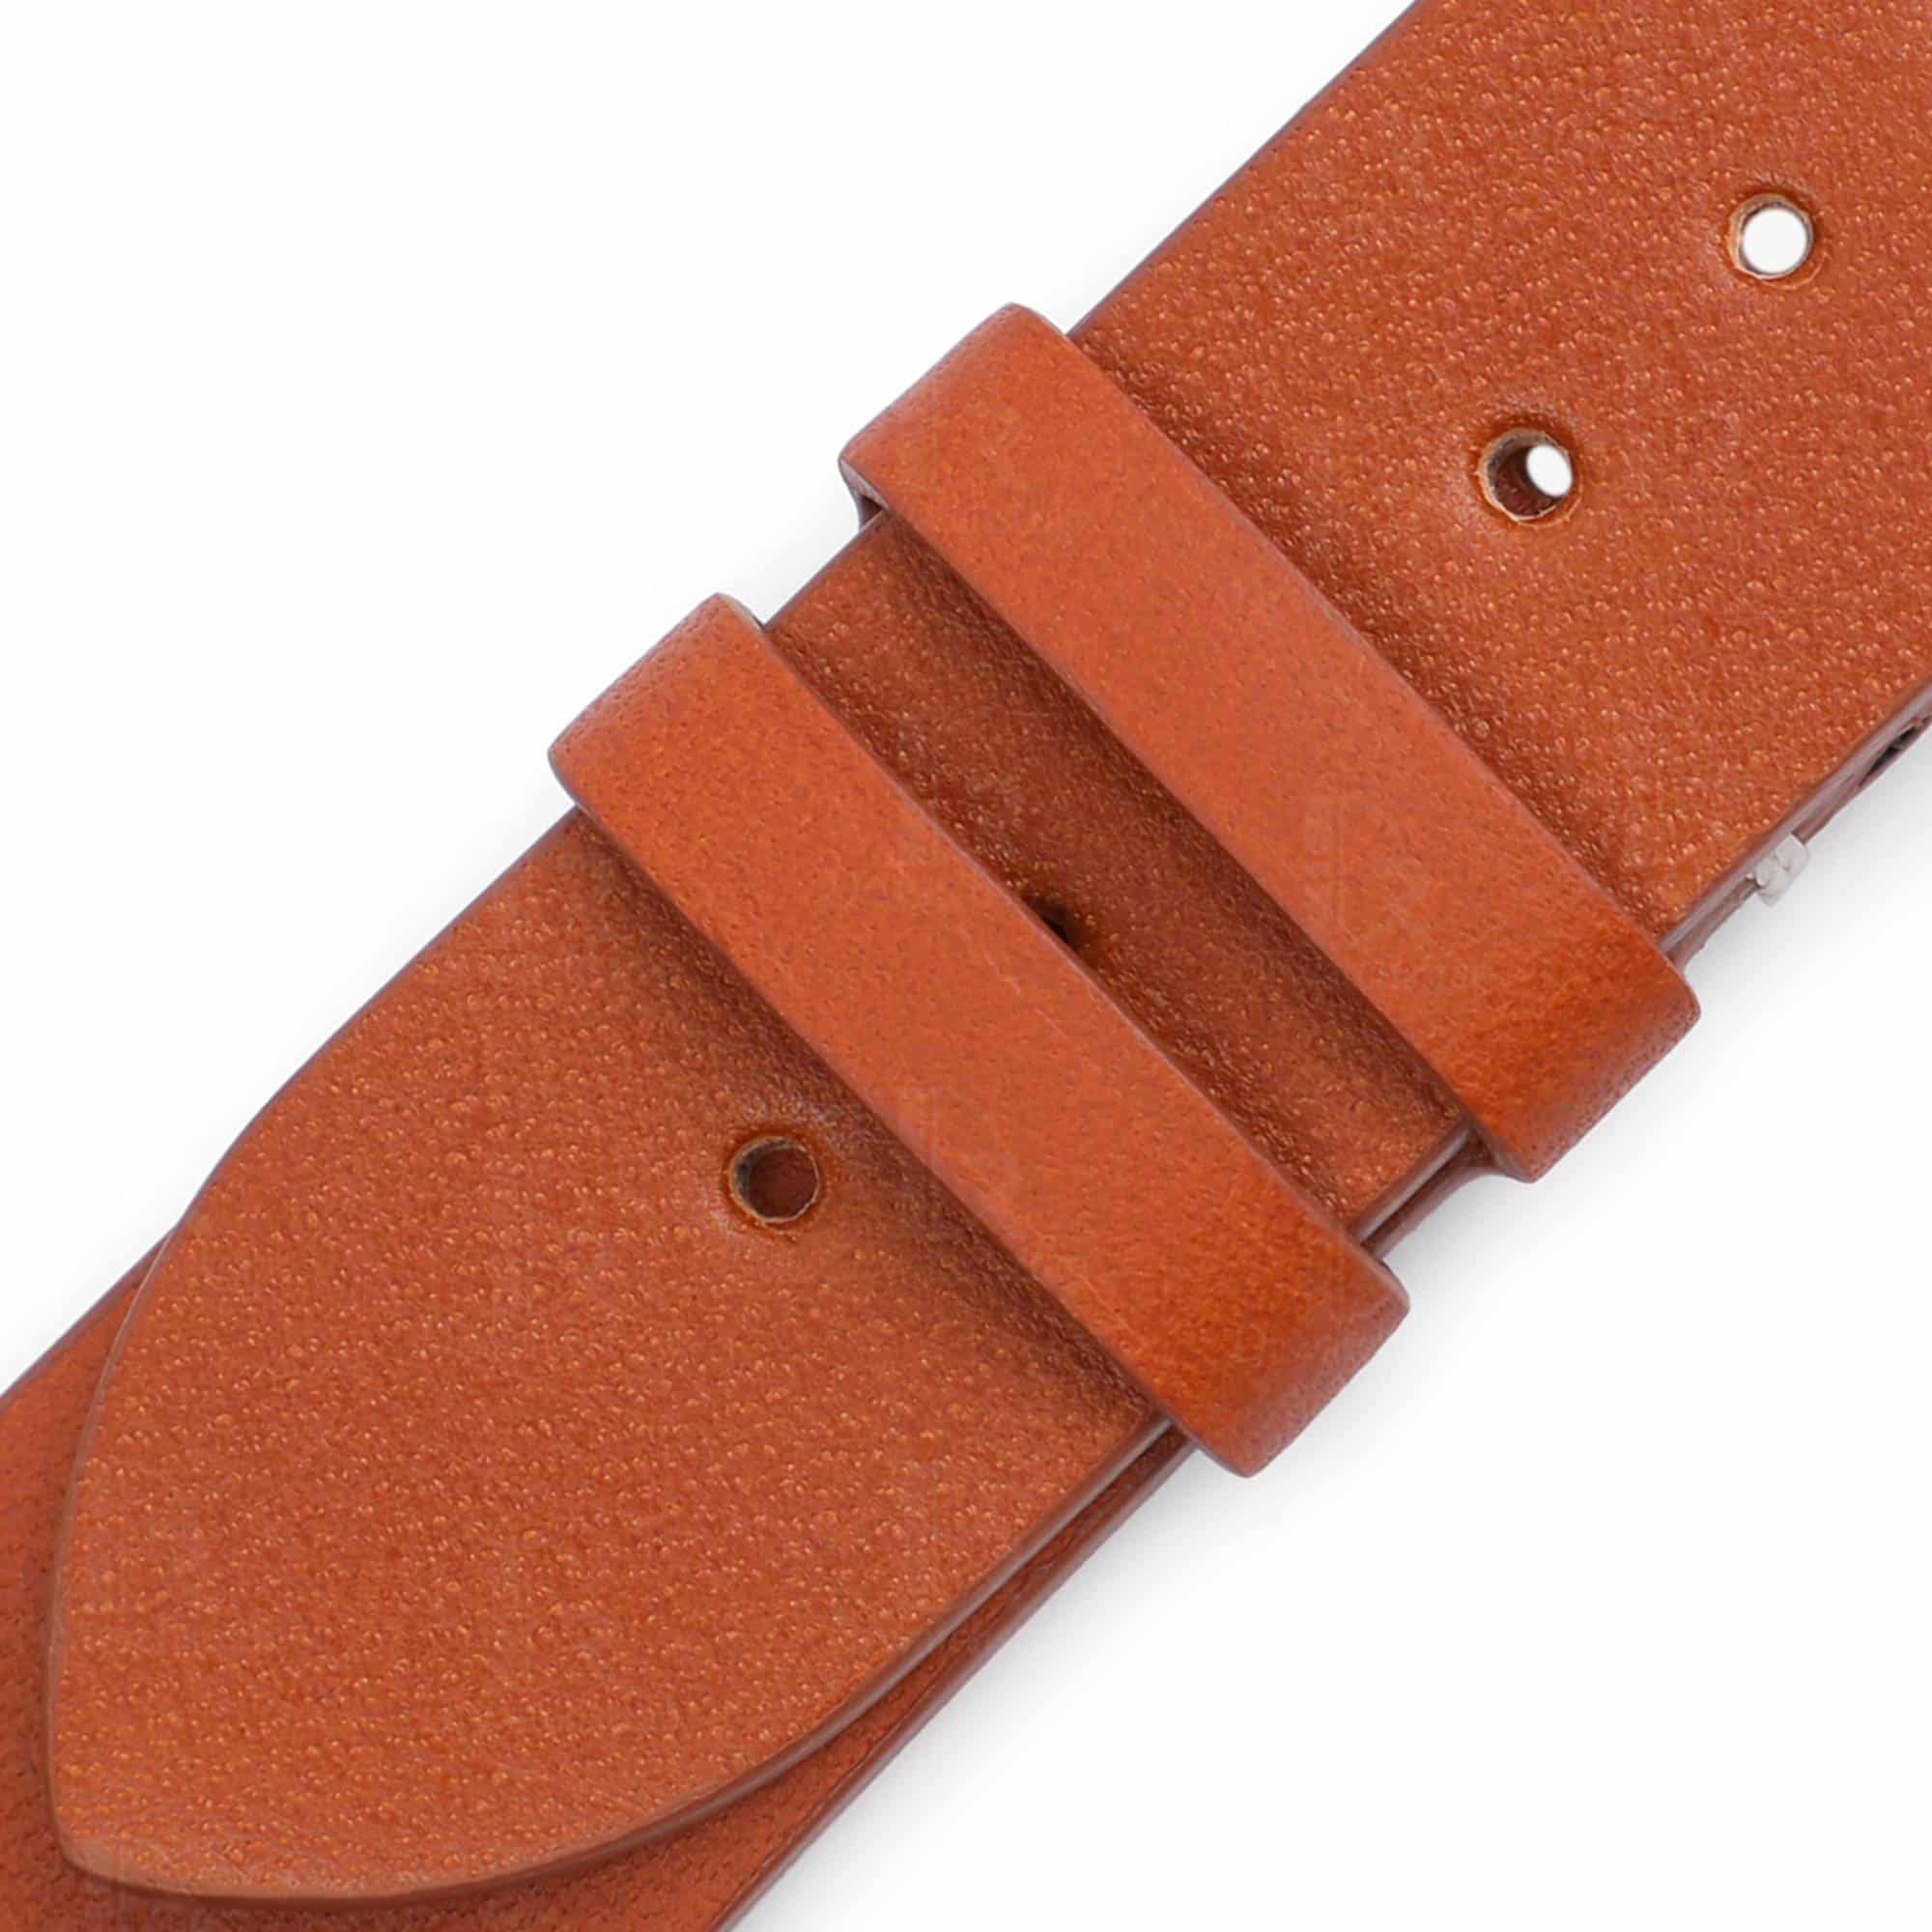 Custom best High-end qualtiy premium calfskin orange replacement leather Rolex Hermes Strap and watchband with 20mm lug size handmade for Rolex, Tudor, Patek Philippe universale watches online at a low price